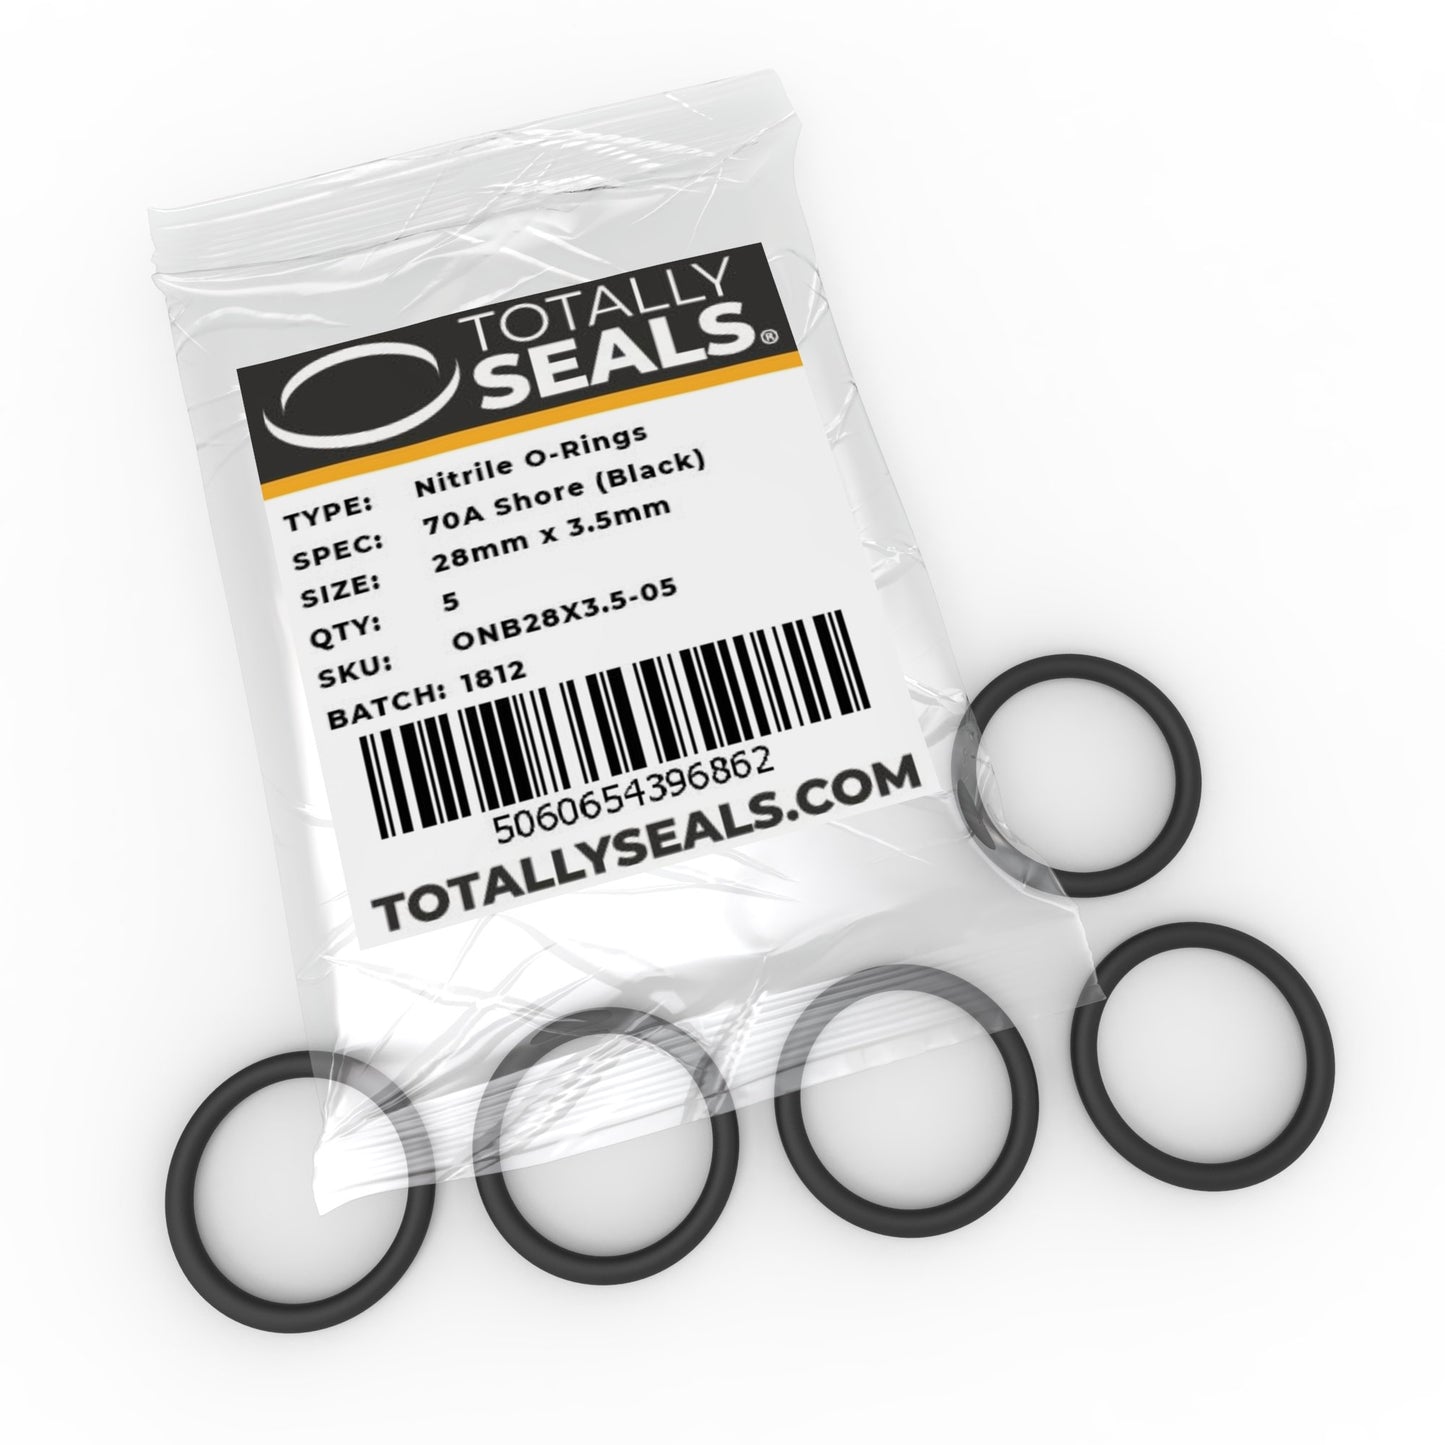 28mm x 3.5mm (35mm OD) Nitrile O-Rings - Totally Seals®